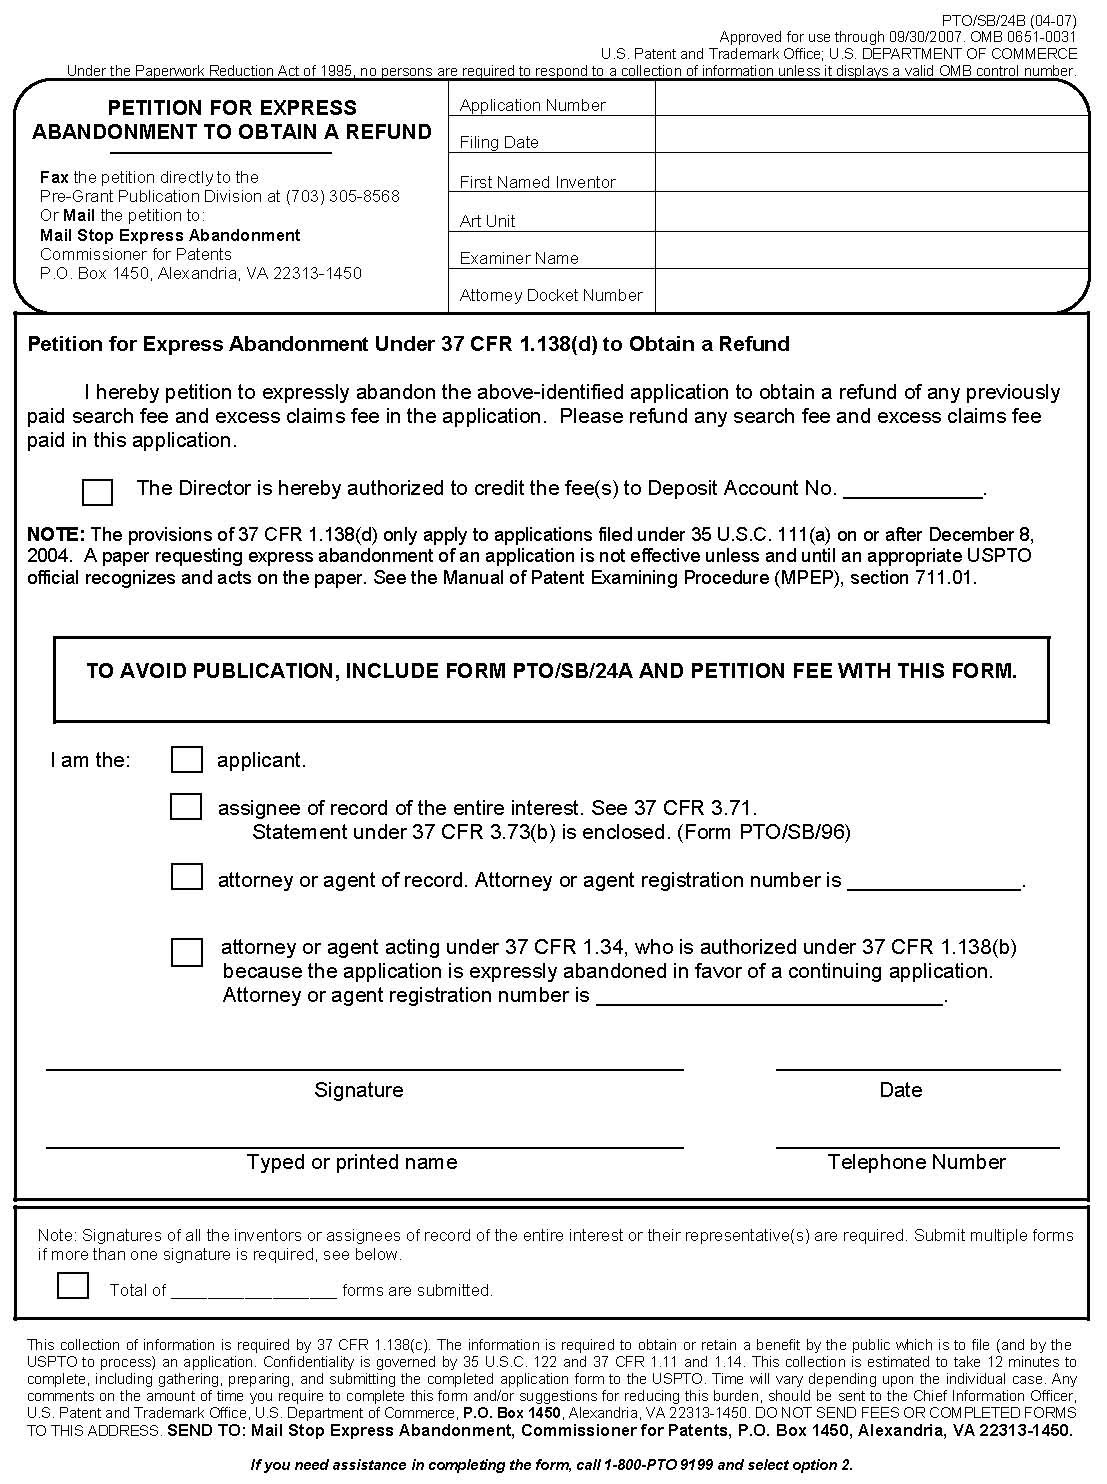 form pto/sb/24b petition for express abandonment to obtain a refund)